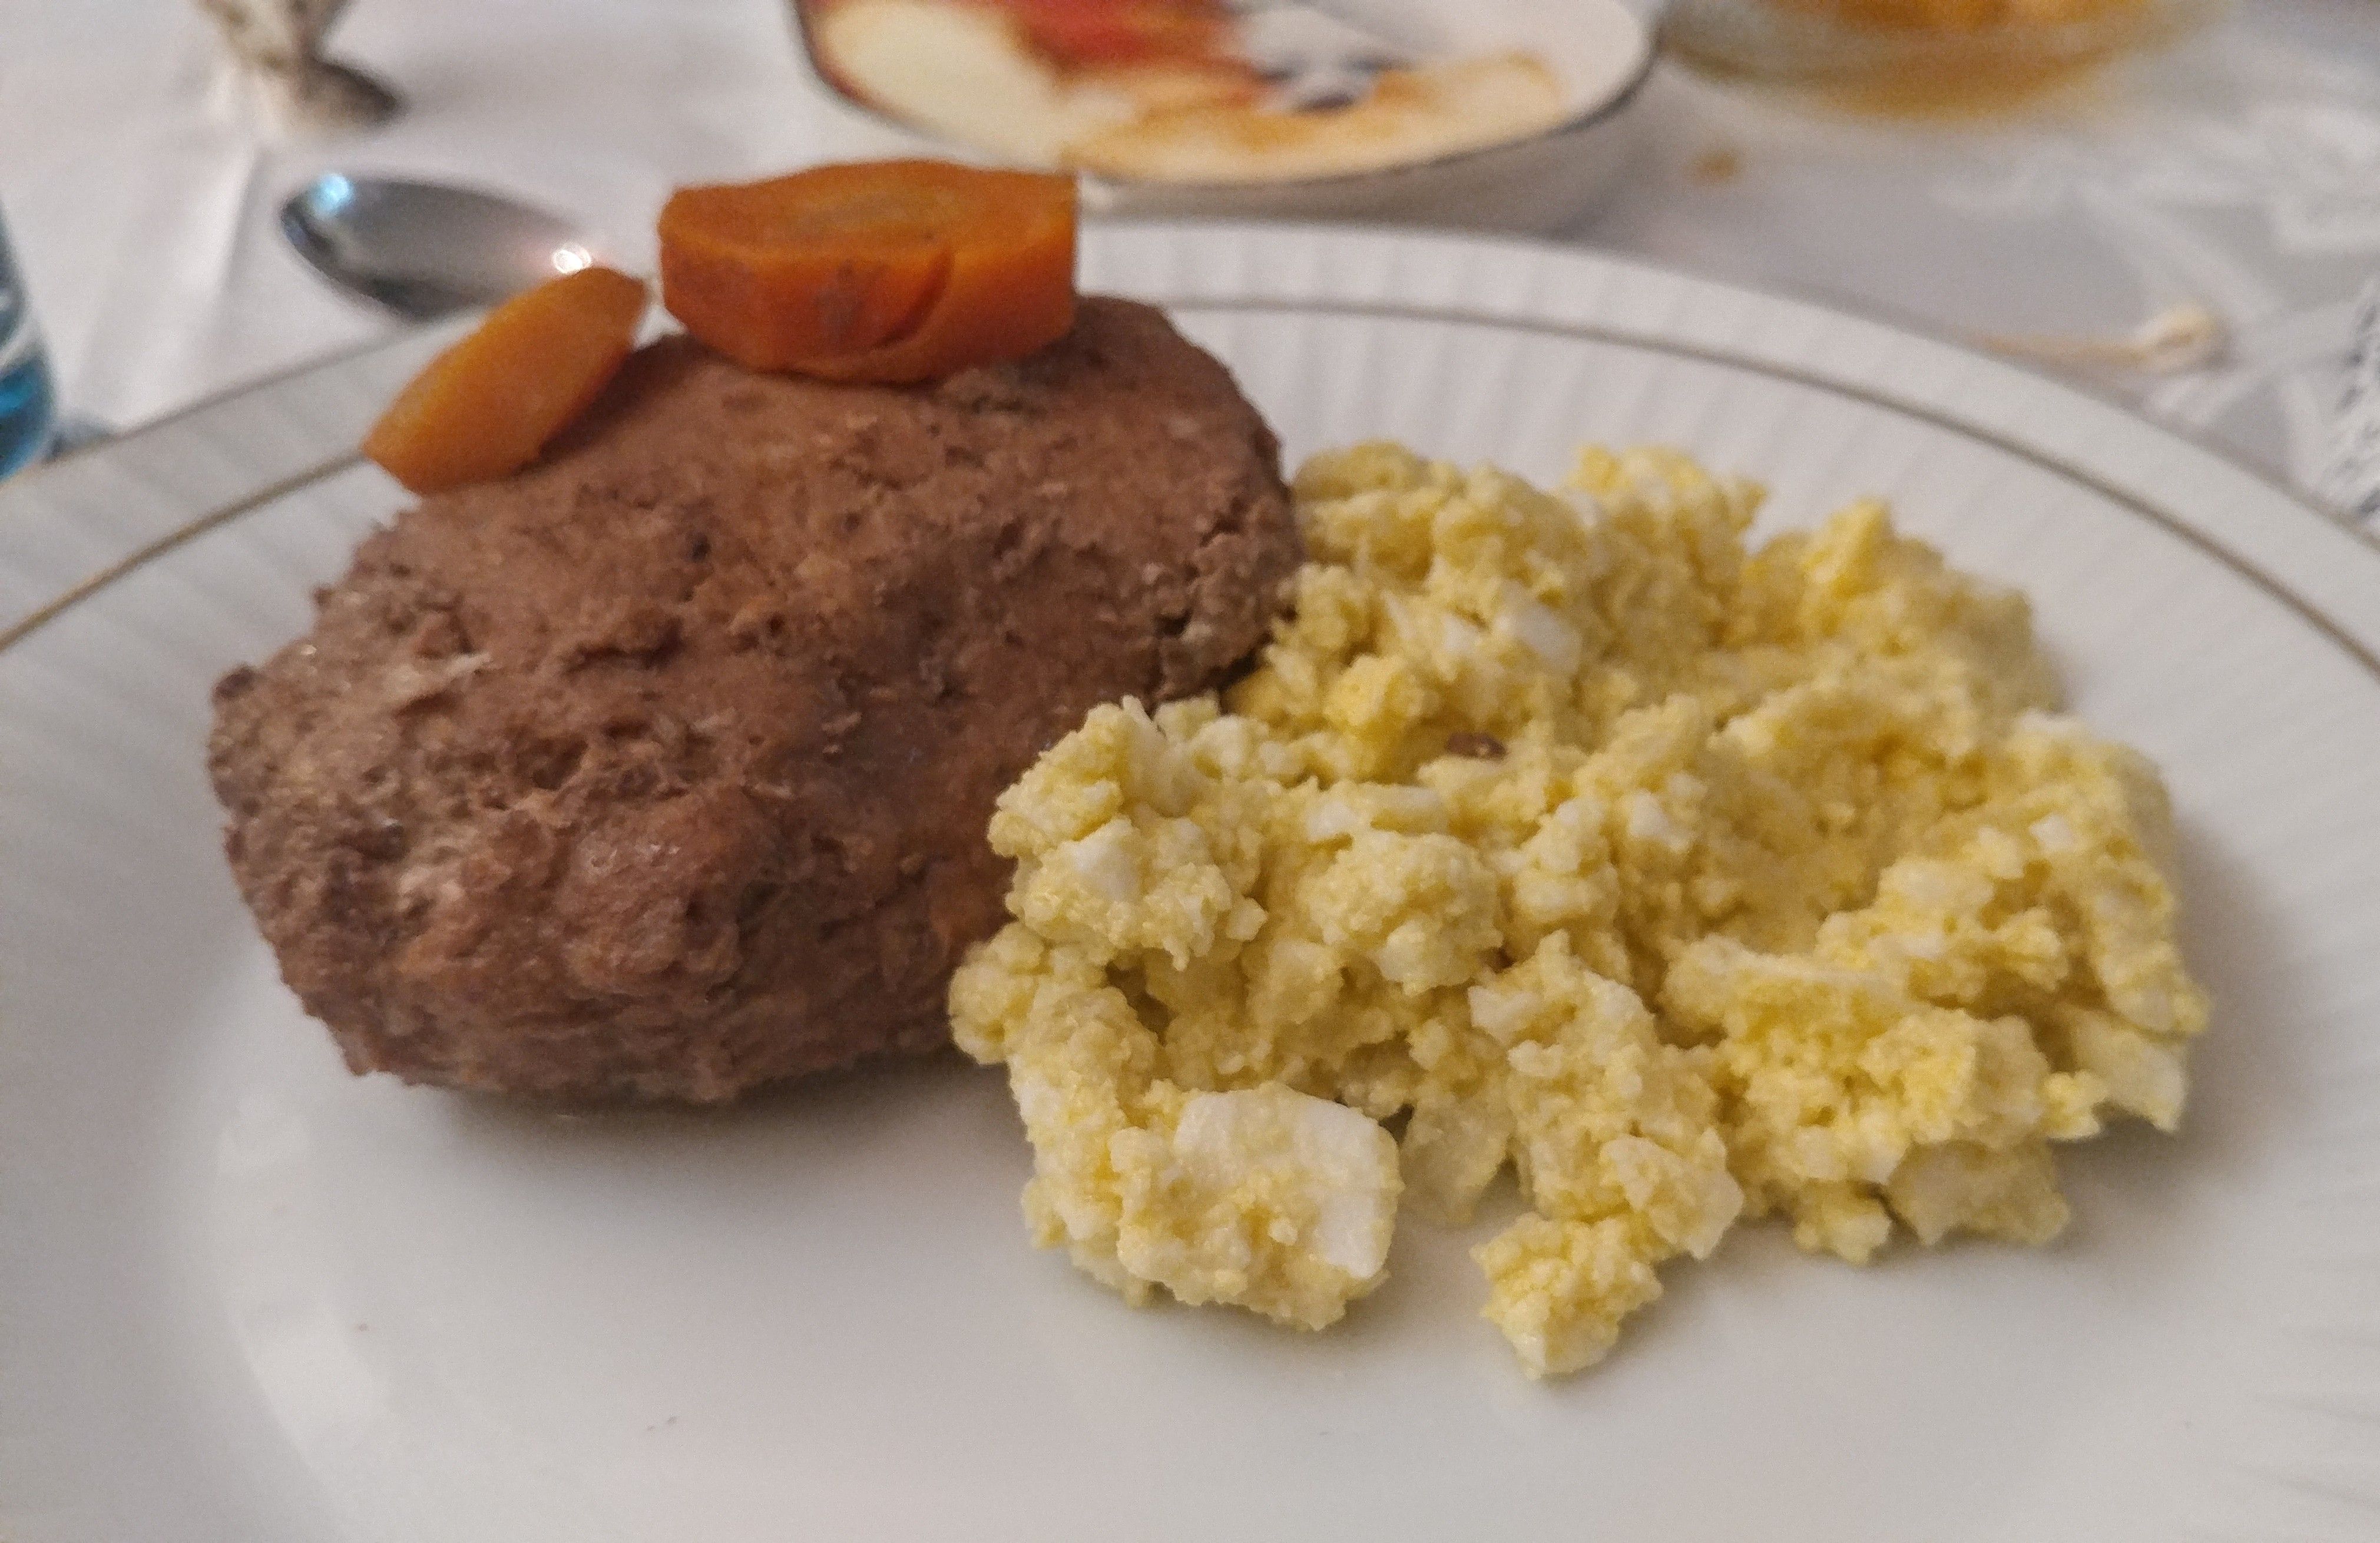 Caption: Gefilte fish with two slices of carrot on the top, served with an egg, potato and onion salad.